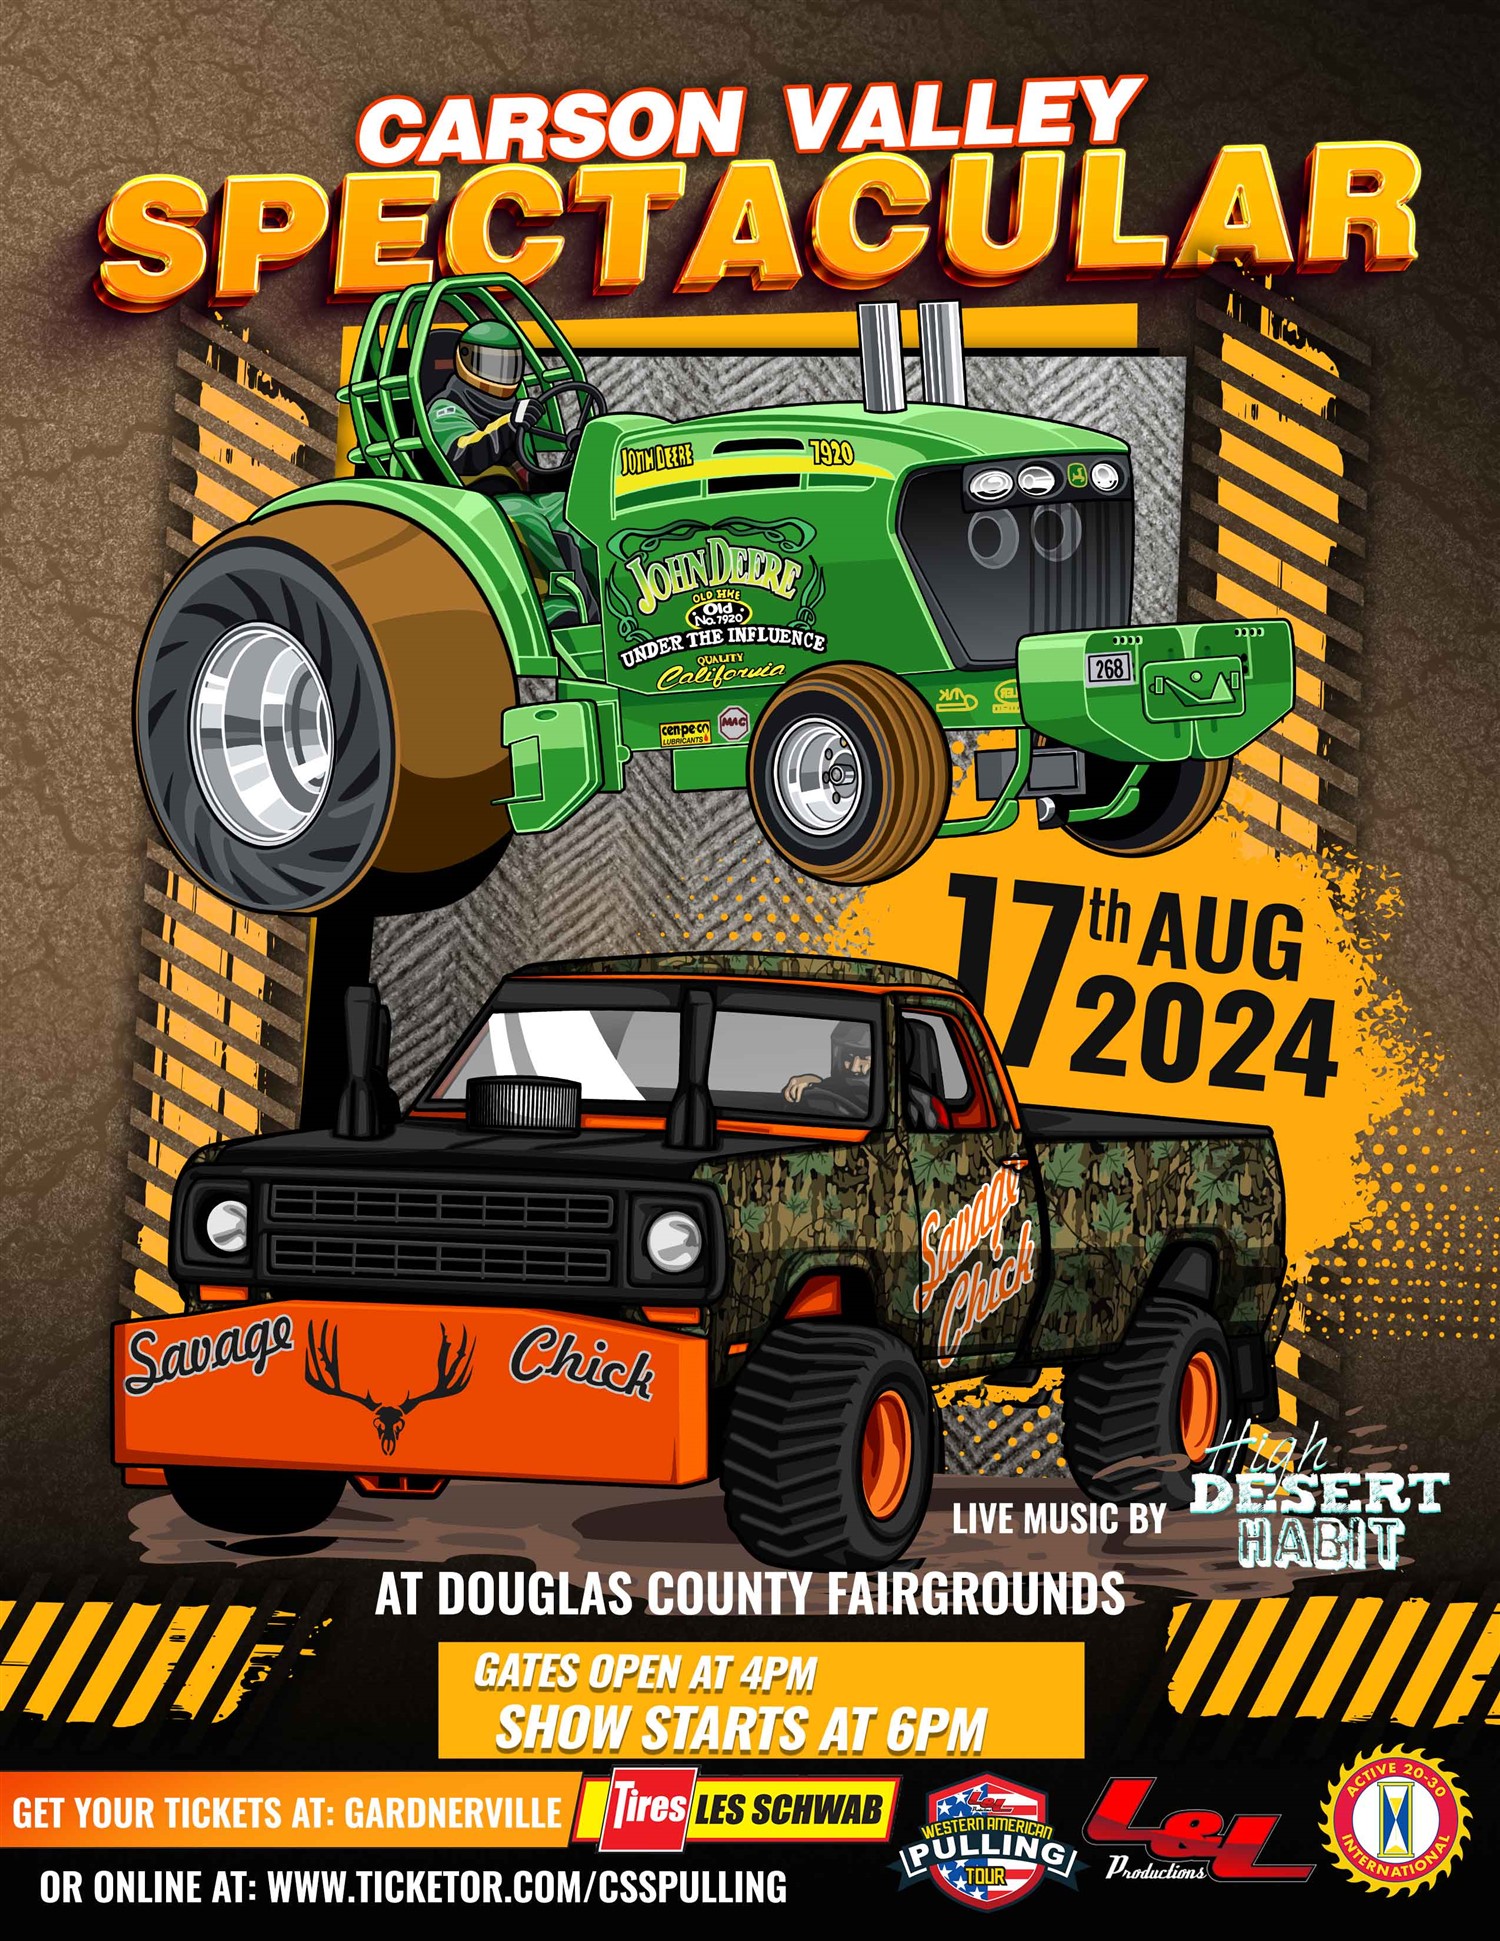 Carson Valley Spectacular Tractor Pulls on Aug 17, 18:00@Douglas County Fairgrounds - Buy tickets and Get information on L & L Productions 